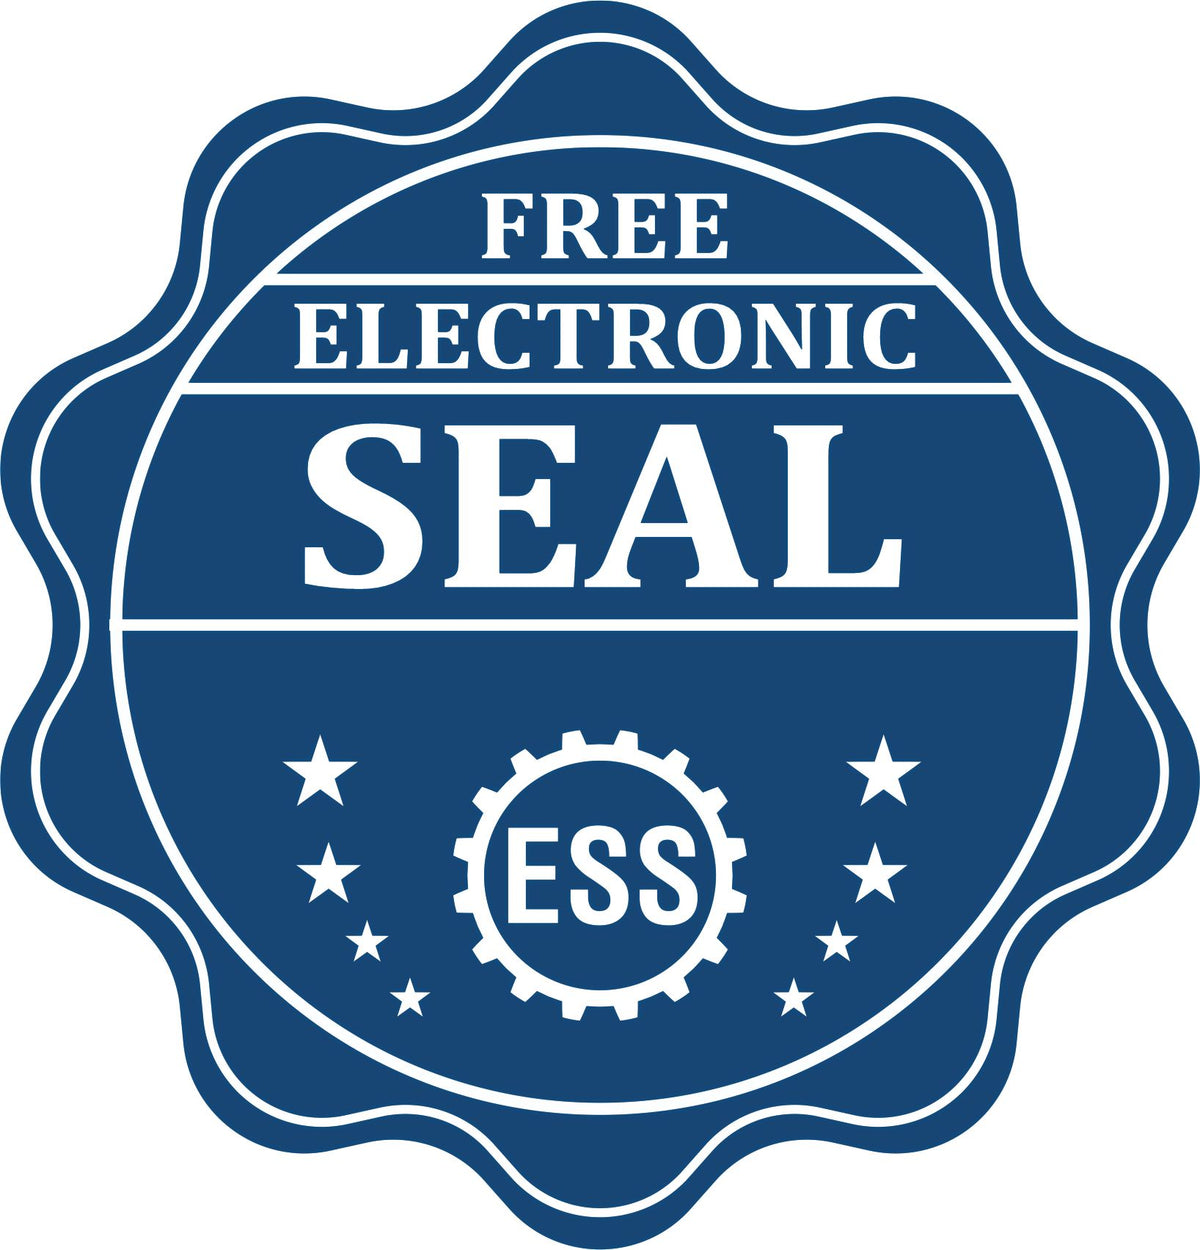 A badge showing a free electronic seal for the Gift Vermont Land Surveyor Seal with stars and the ESS gear on the emblem.